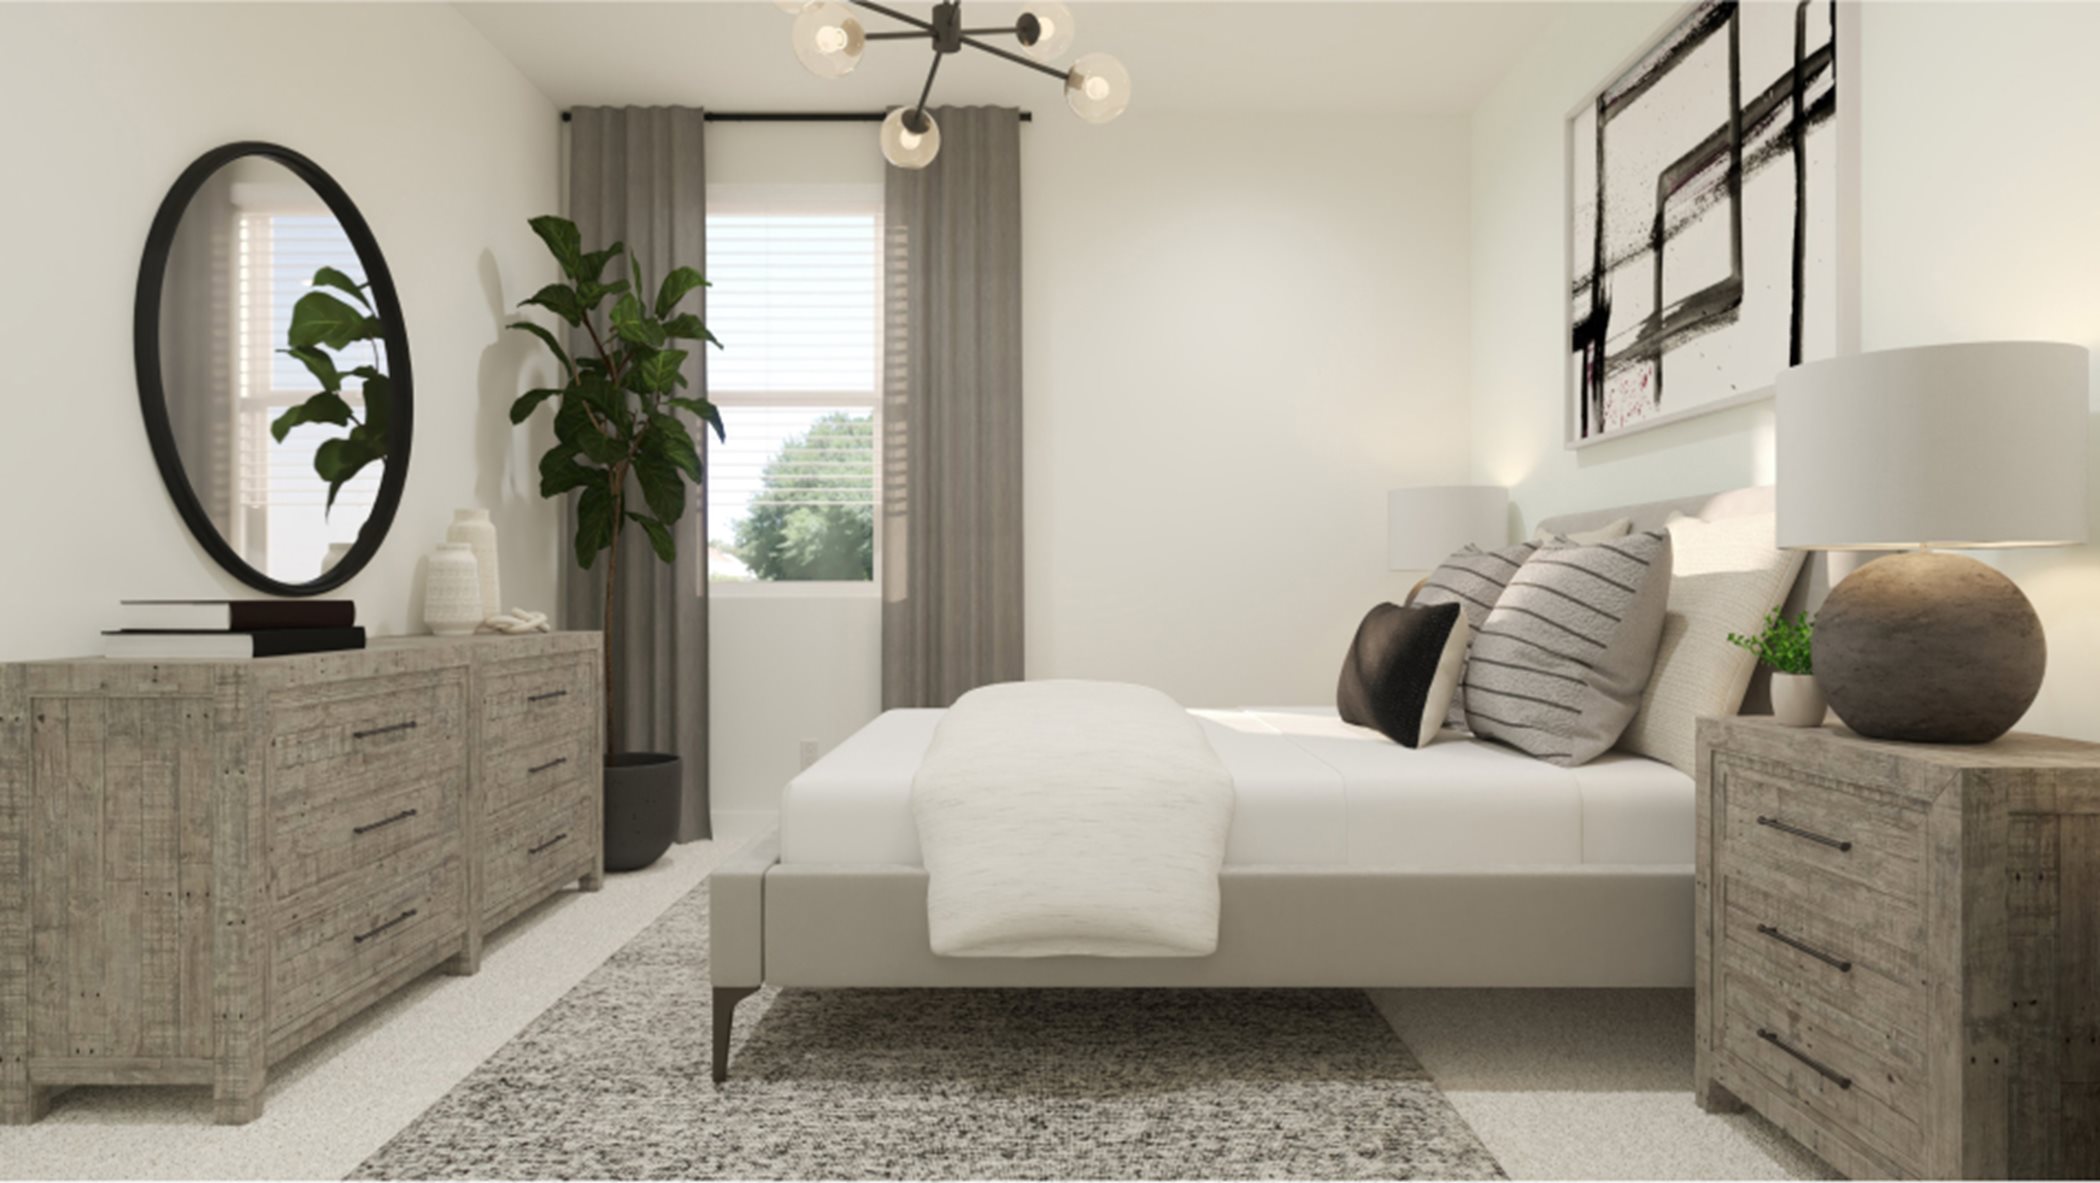 Bedroom styled as a guest room